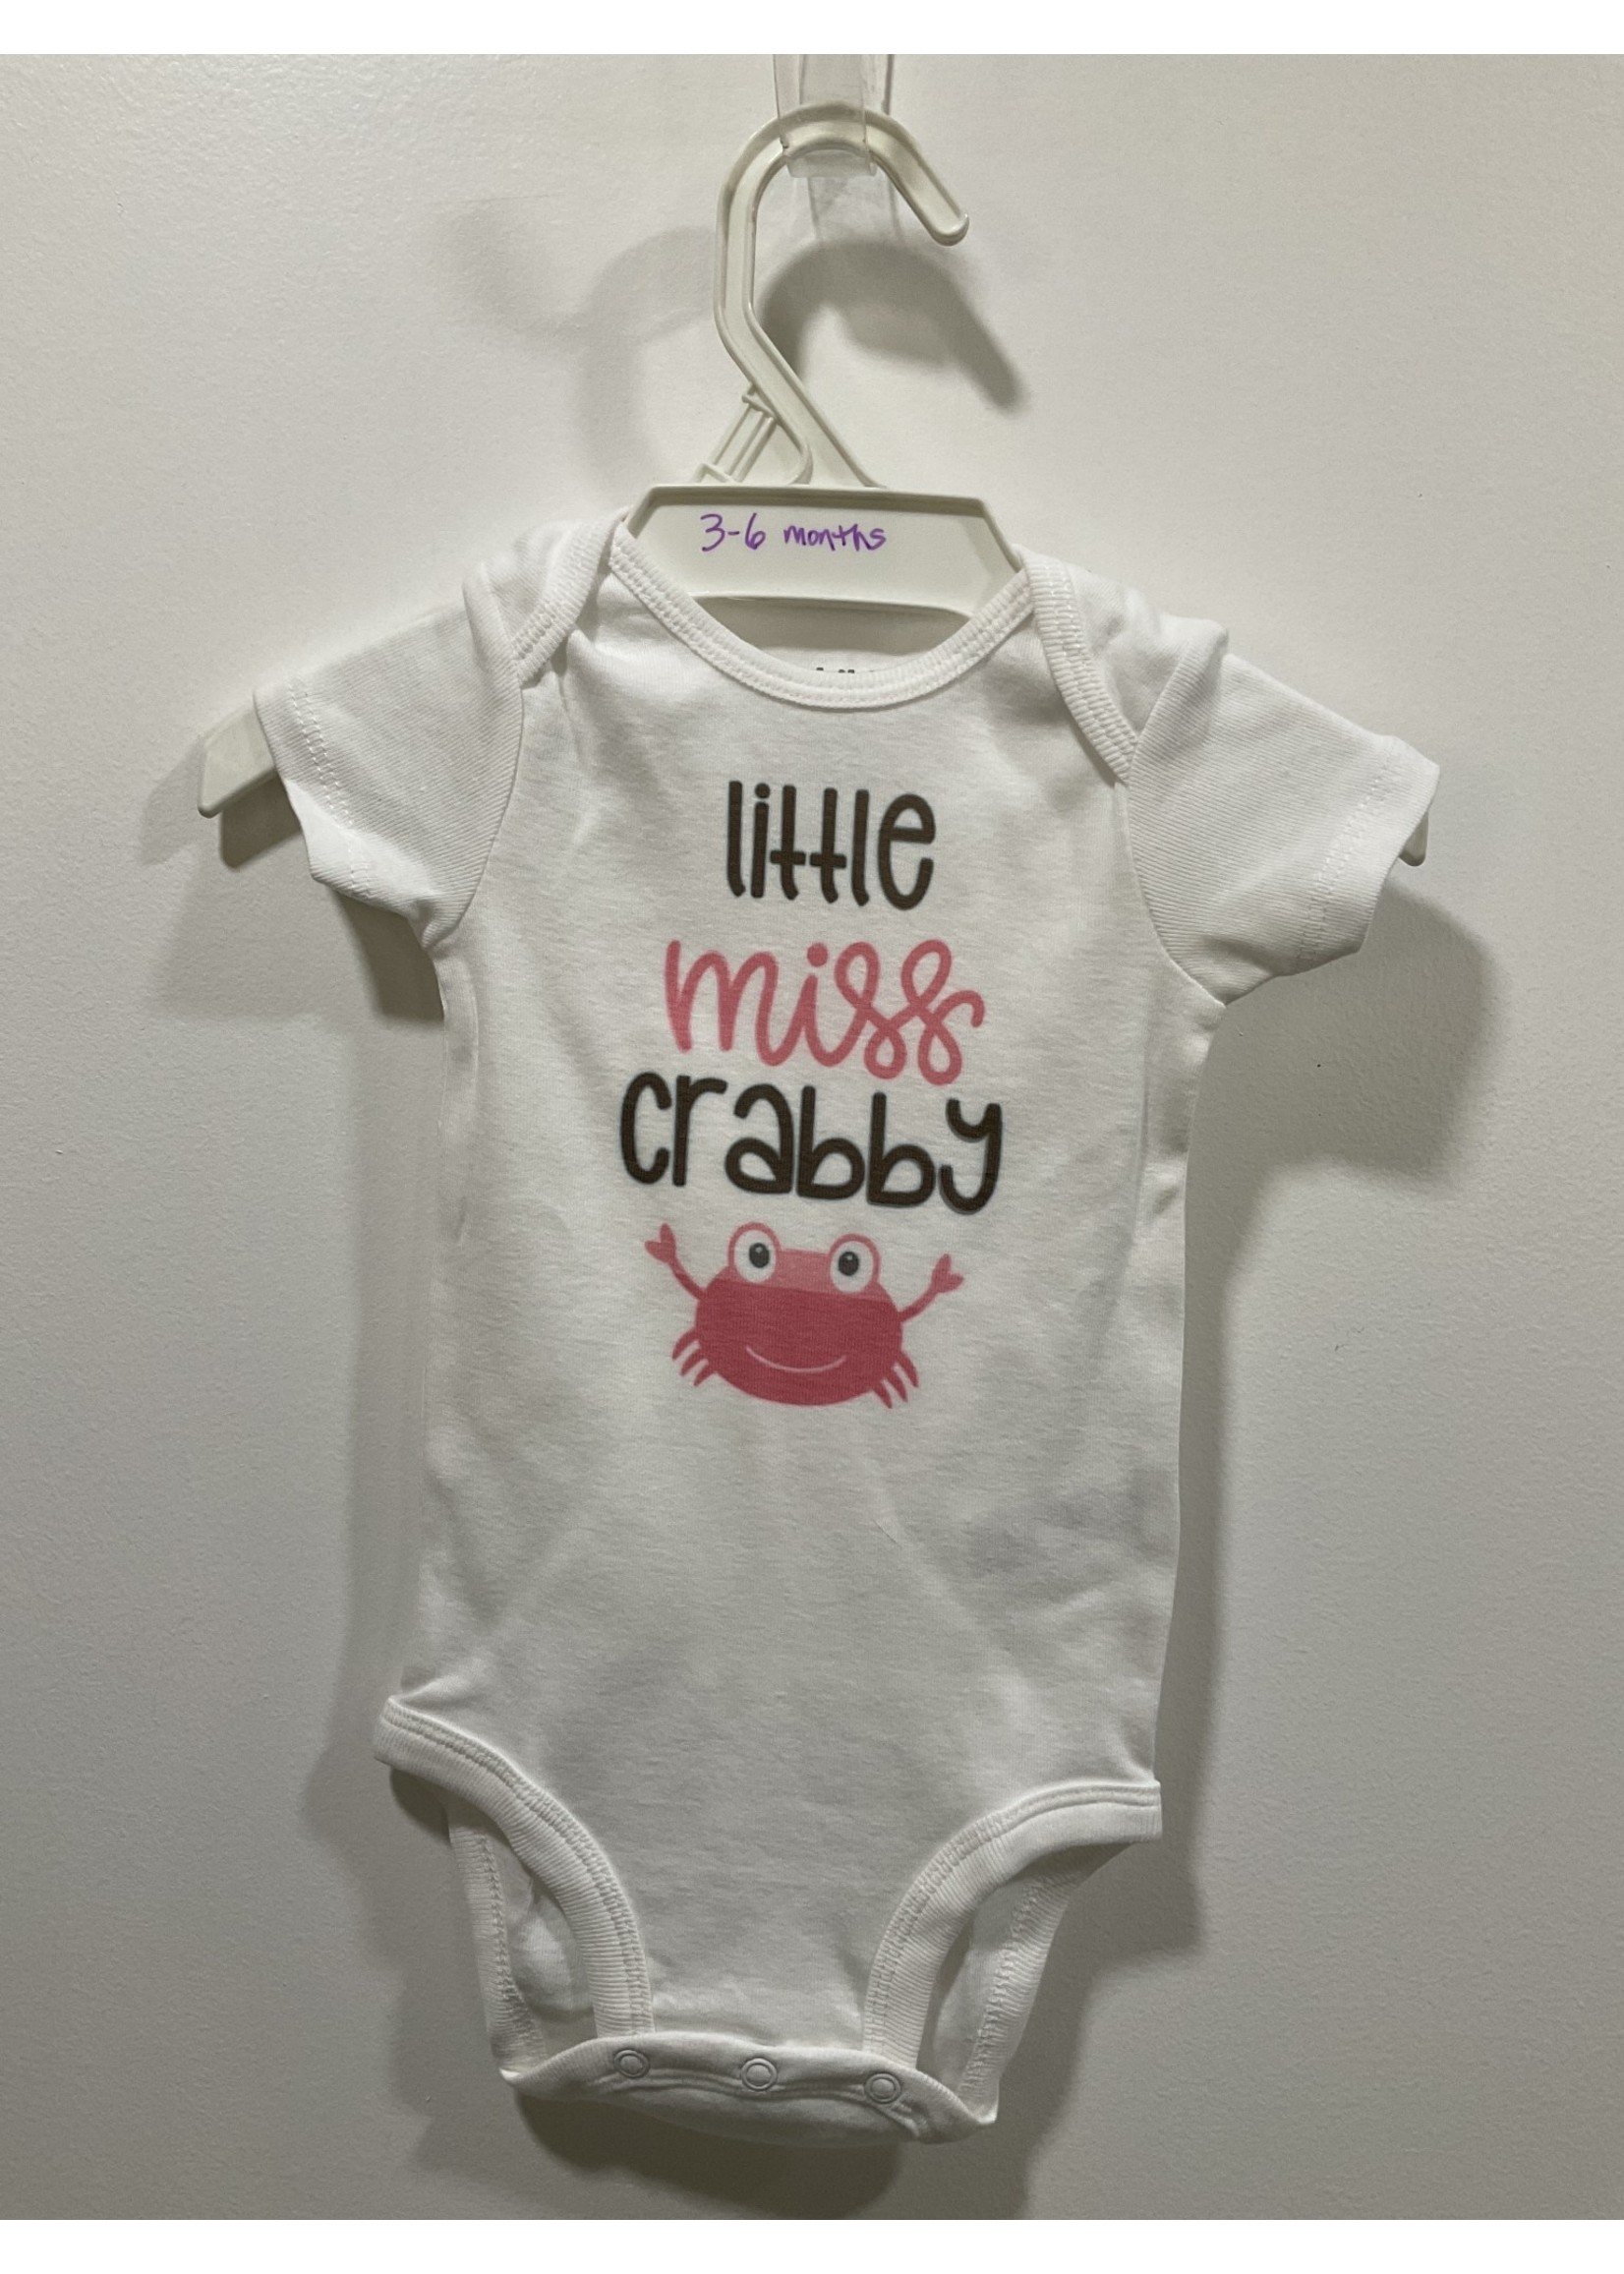 My New Favorite Thing Onsie White w/Black and Pink "Little Miss Crabby" short sleeve 3-6 month